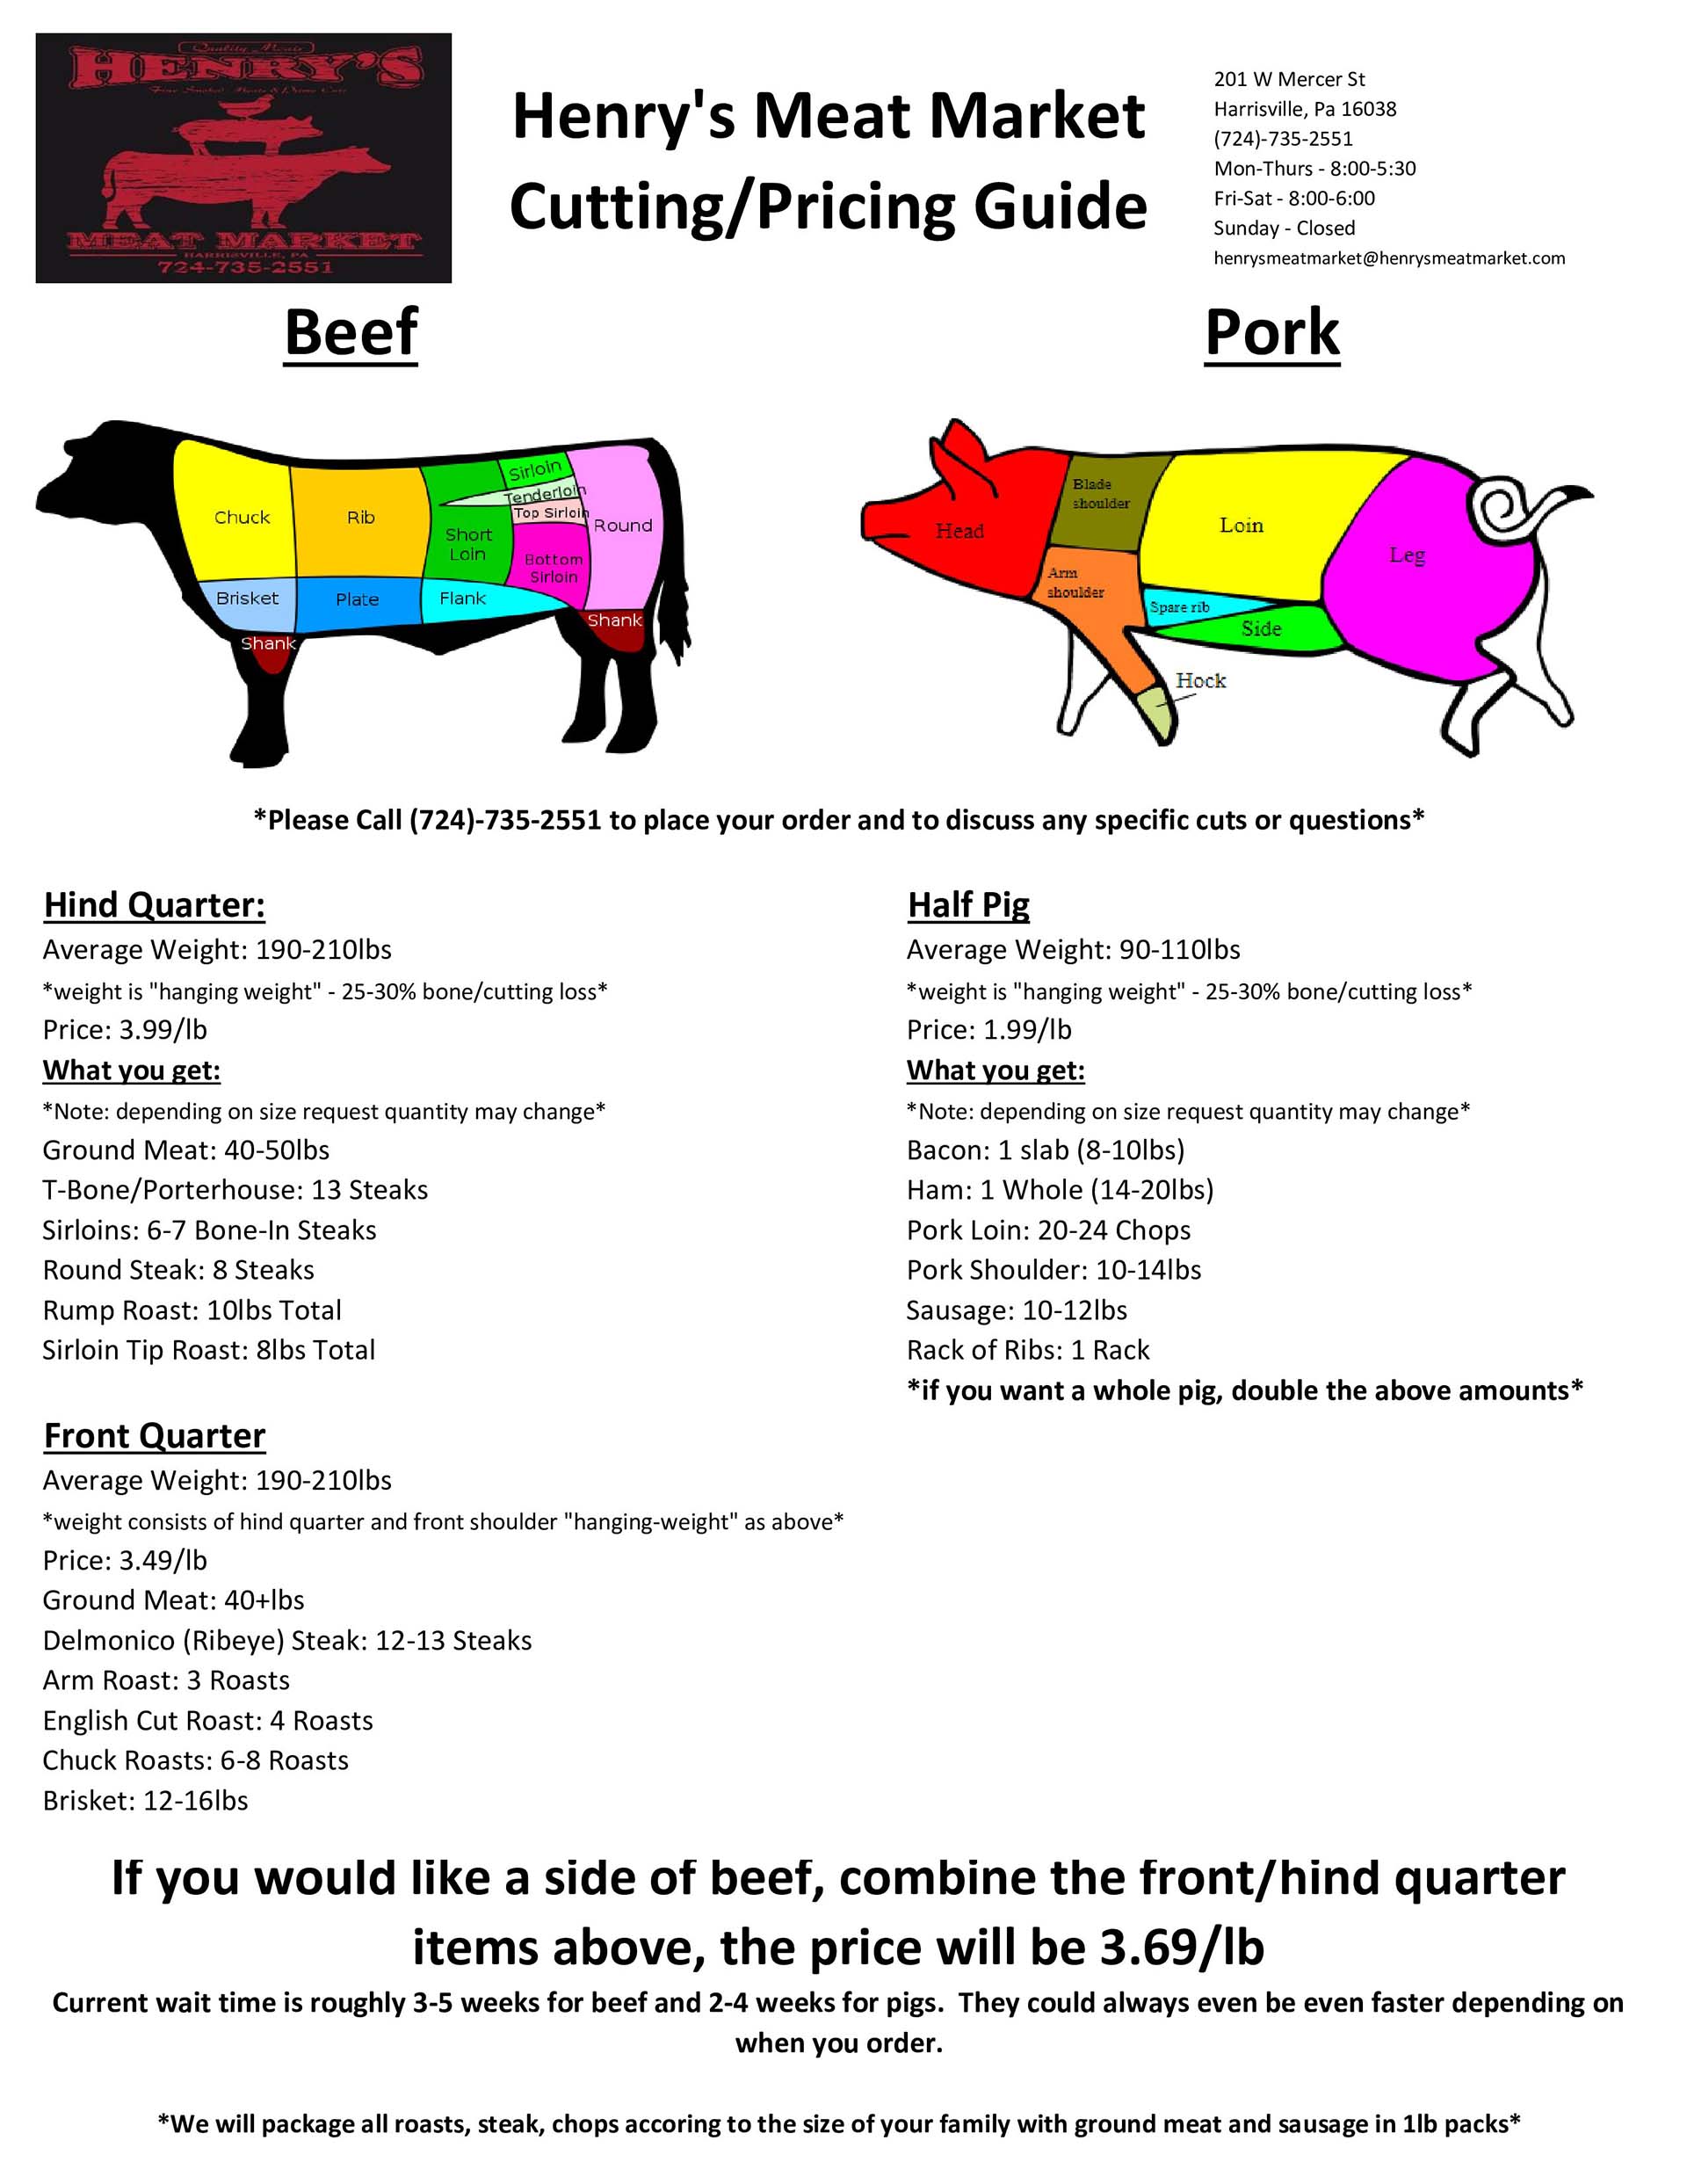 Meat Cutting Guide